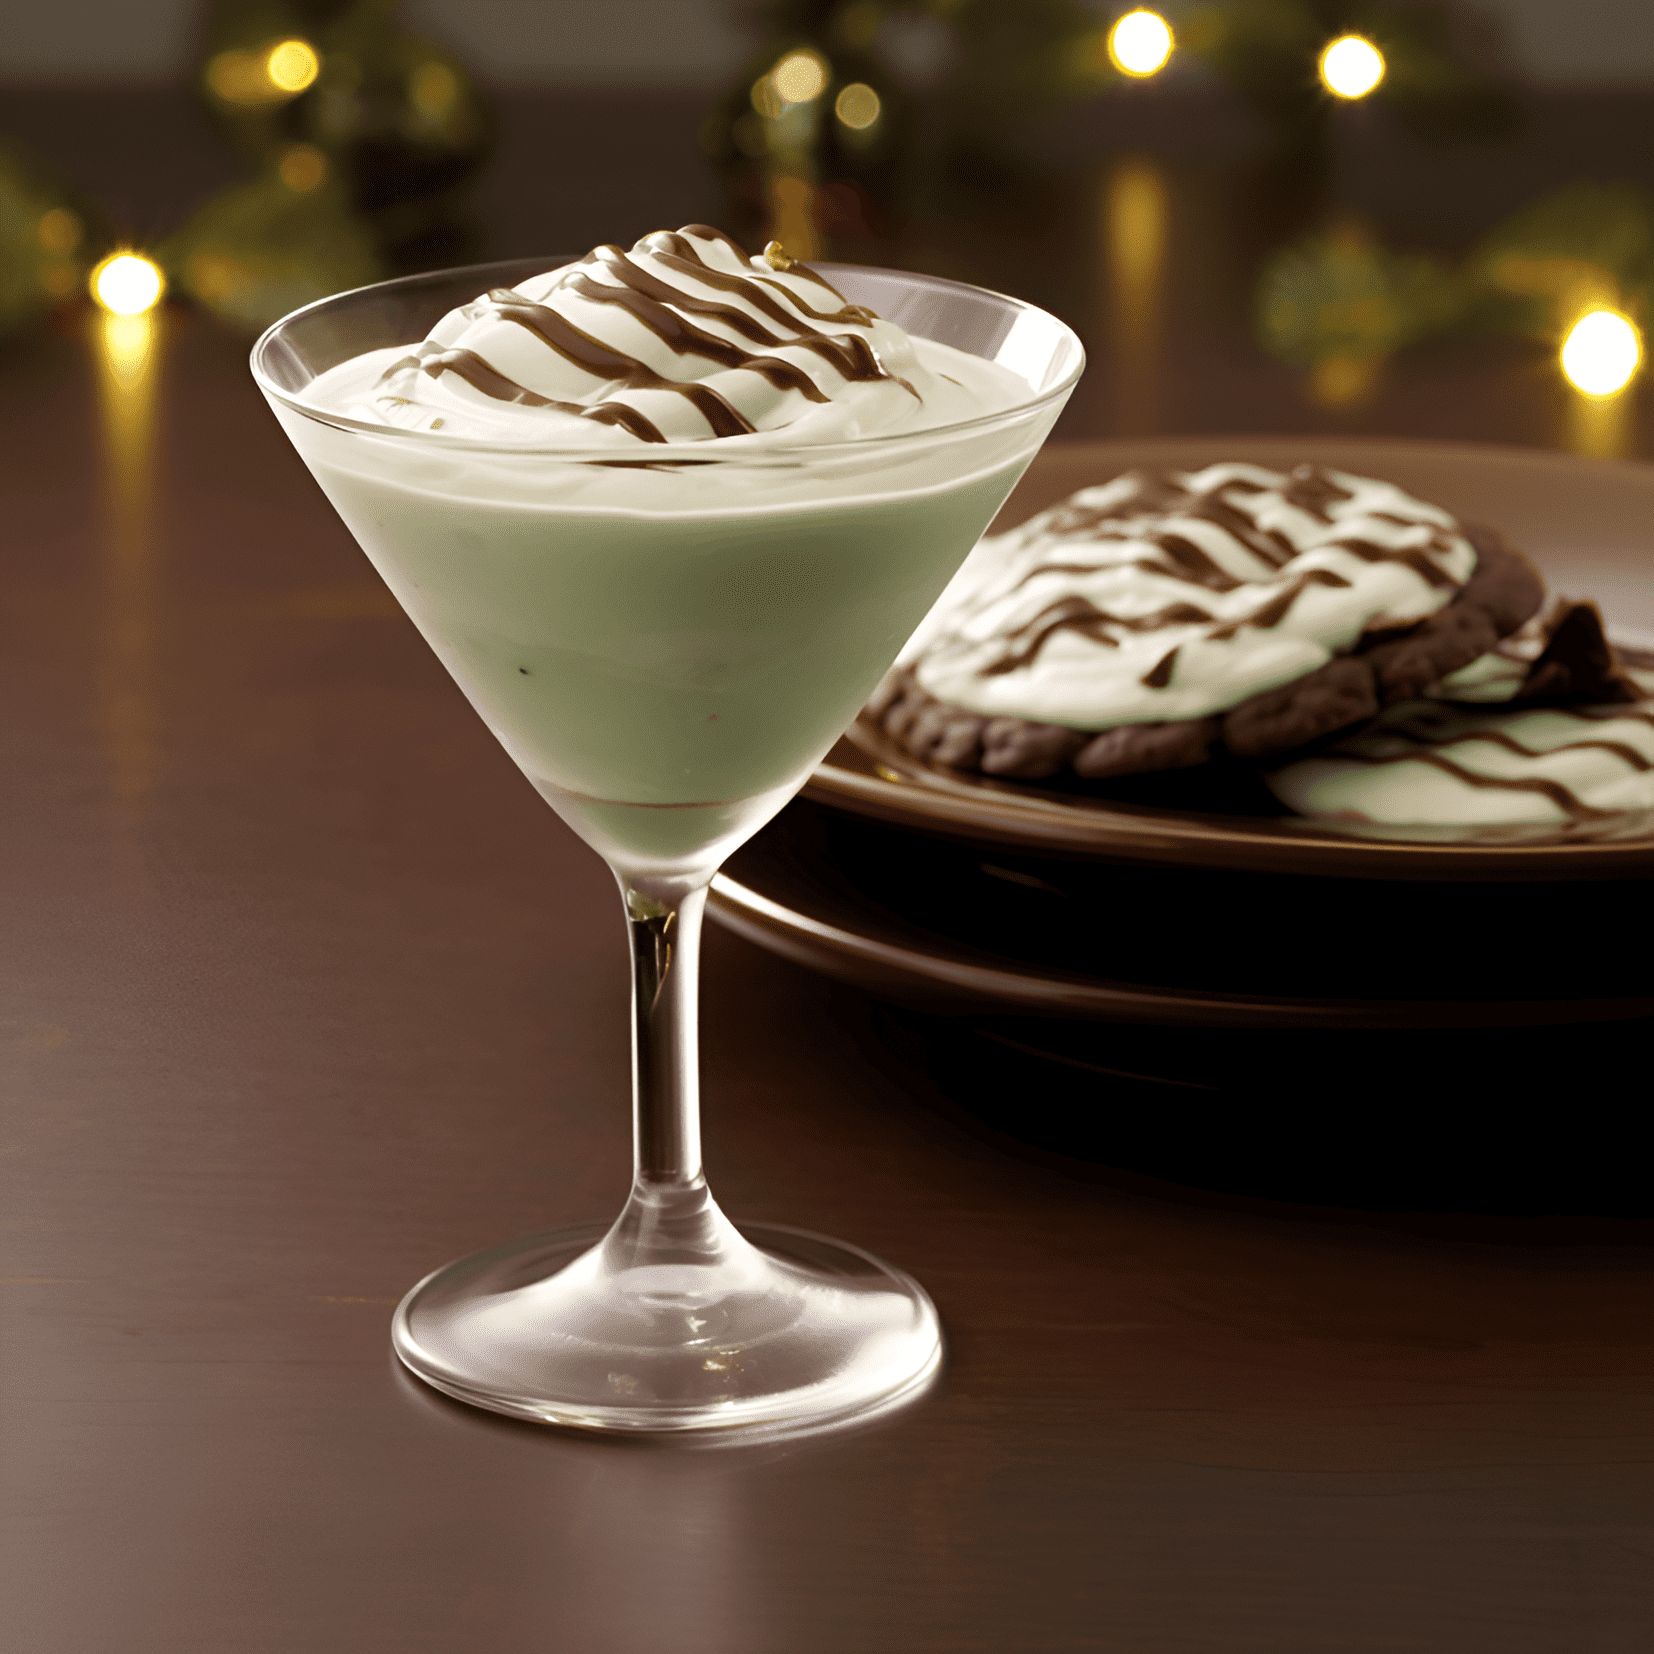 Peppermint Patty Cocktail Recipe - The Peppermint Patty cocktail is a sweet, creamy, and minty drink with a hint of chocolate. It has a smooth and velvety texture, with a cooling sensation from the peppermint that leaves a refreshing aftertaste.